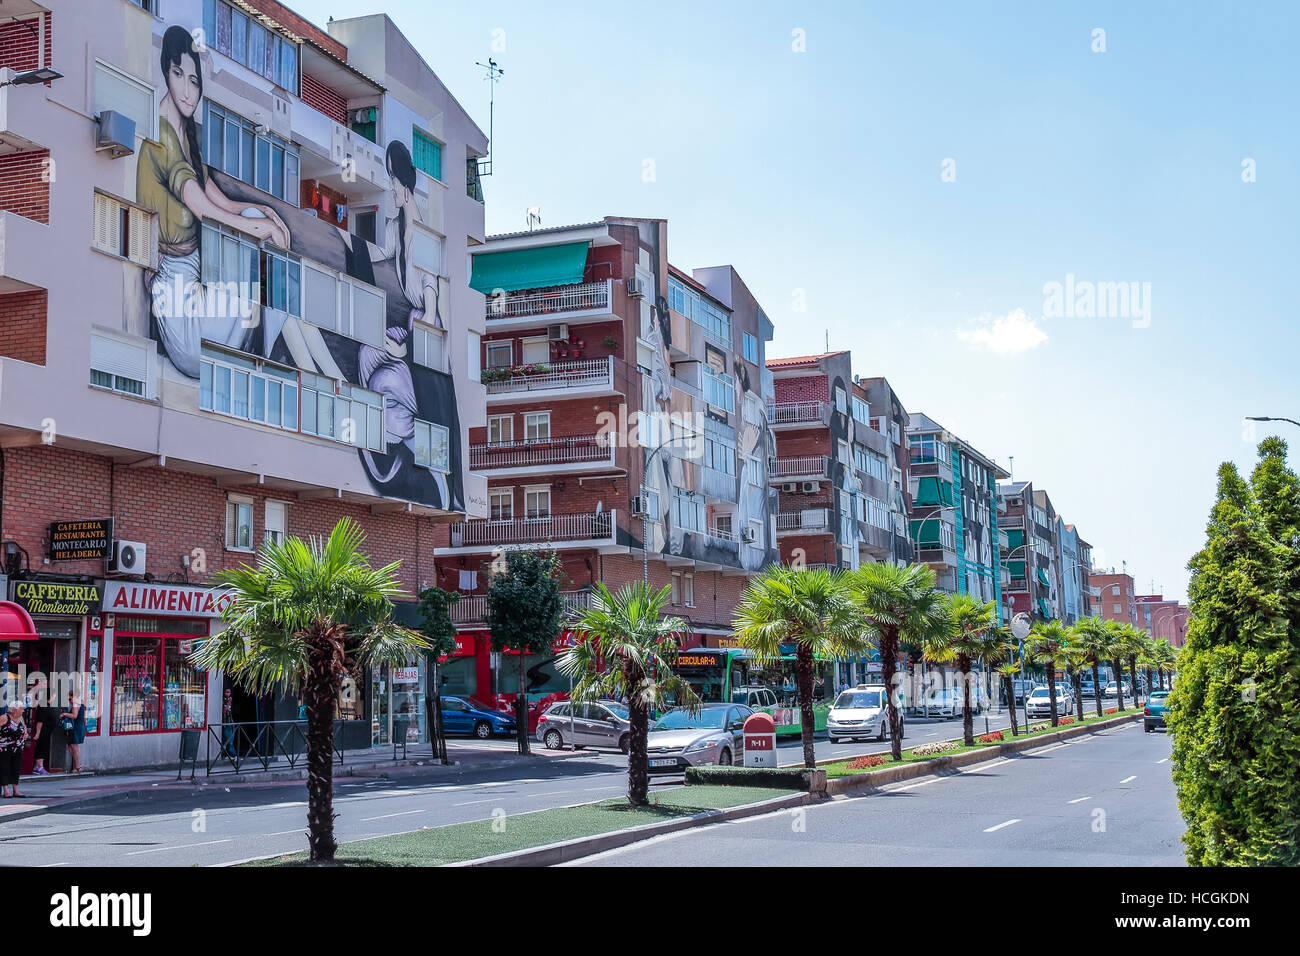 TORREJON DE ARDOZ, MADRID, SPAIN - JULY 15: street in the downtown of the  city of torrejon de ardoz, spain with facades decorated with pictures of  dif Stock Photo - Alamy